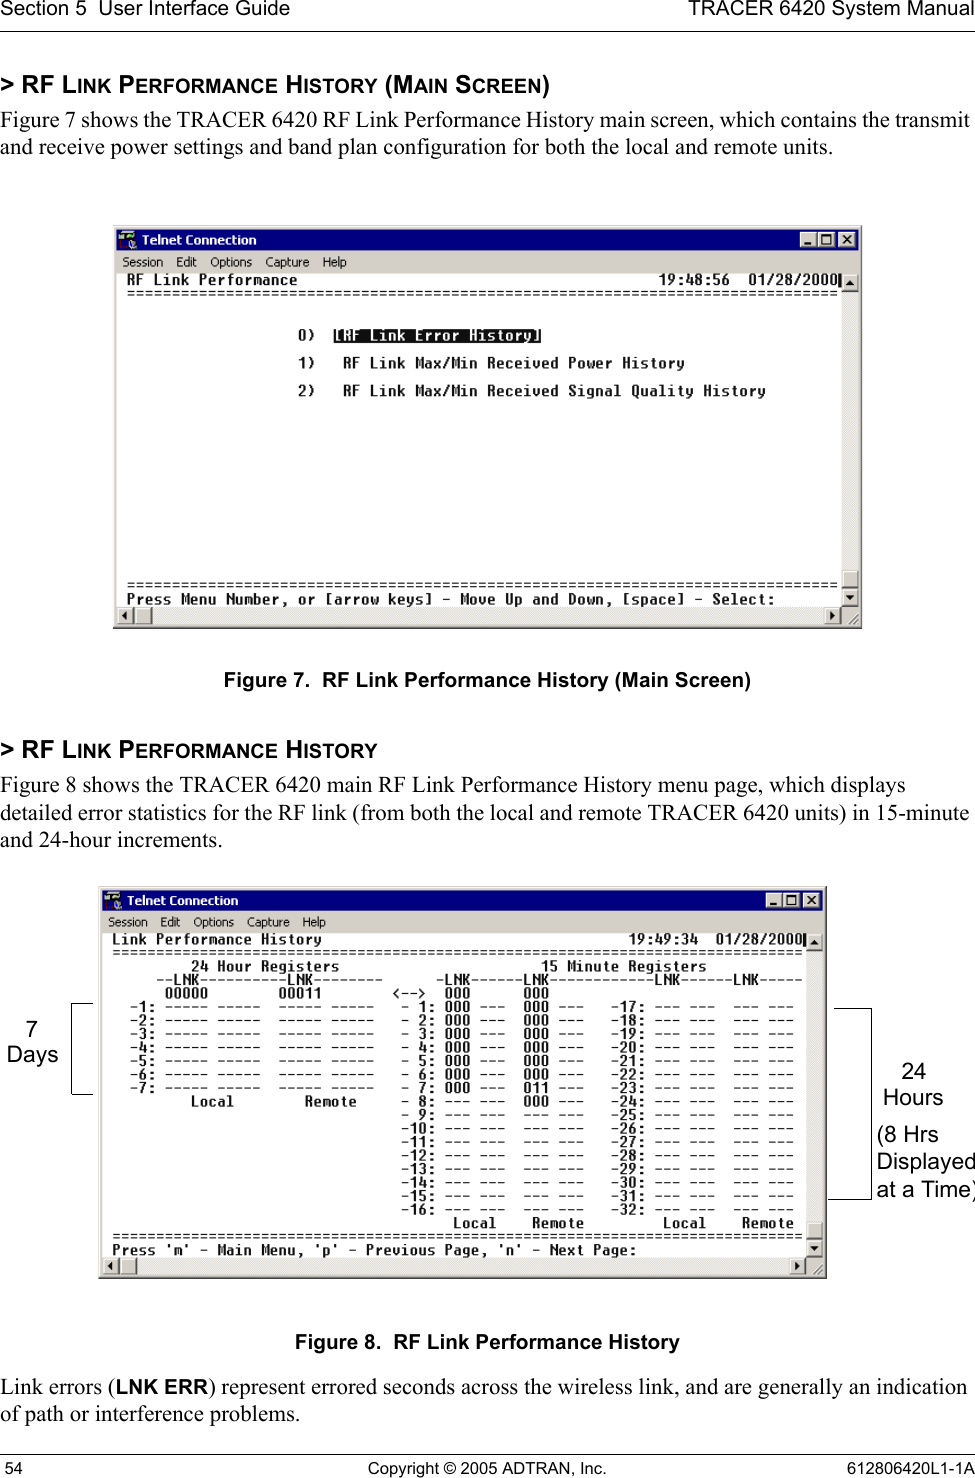 Section 5  User Interface Guide TRACER 6420 System Manual 54 Copyright © 2005 ADTRAN, Inc. 612806420L1-1A&gt; RF LINK PERFORMANCE HISTORY (MAIN SCREEN)Figure 7 shows the TRACER 6420 RF Link Performance History main screen, which contains the transmit and receive power settings and band plan configuration for both the local and remote units.Figure 7.  RF Link Performance History (Main Screen)&gt; RF LINK PERFORMANCE HISTORYFigure 8 shows the TRACER 6420 main RF Link Performance History menu page, which displays detailed error statistics for the RF link (from both the local and remote TRACER 6420 units) in 15-minute and 24-hour increments. Figure 8.  RF Link Performance HistoryLink errors (LNK ERR) represent errored seconds across the wireless link, and are generally an indication of path or interference problems.7Days 24Hours(8 Hrs Displayedat a Time)